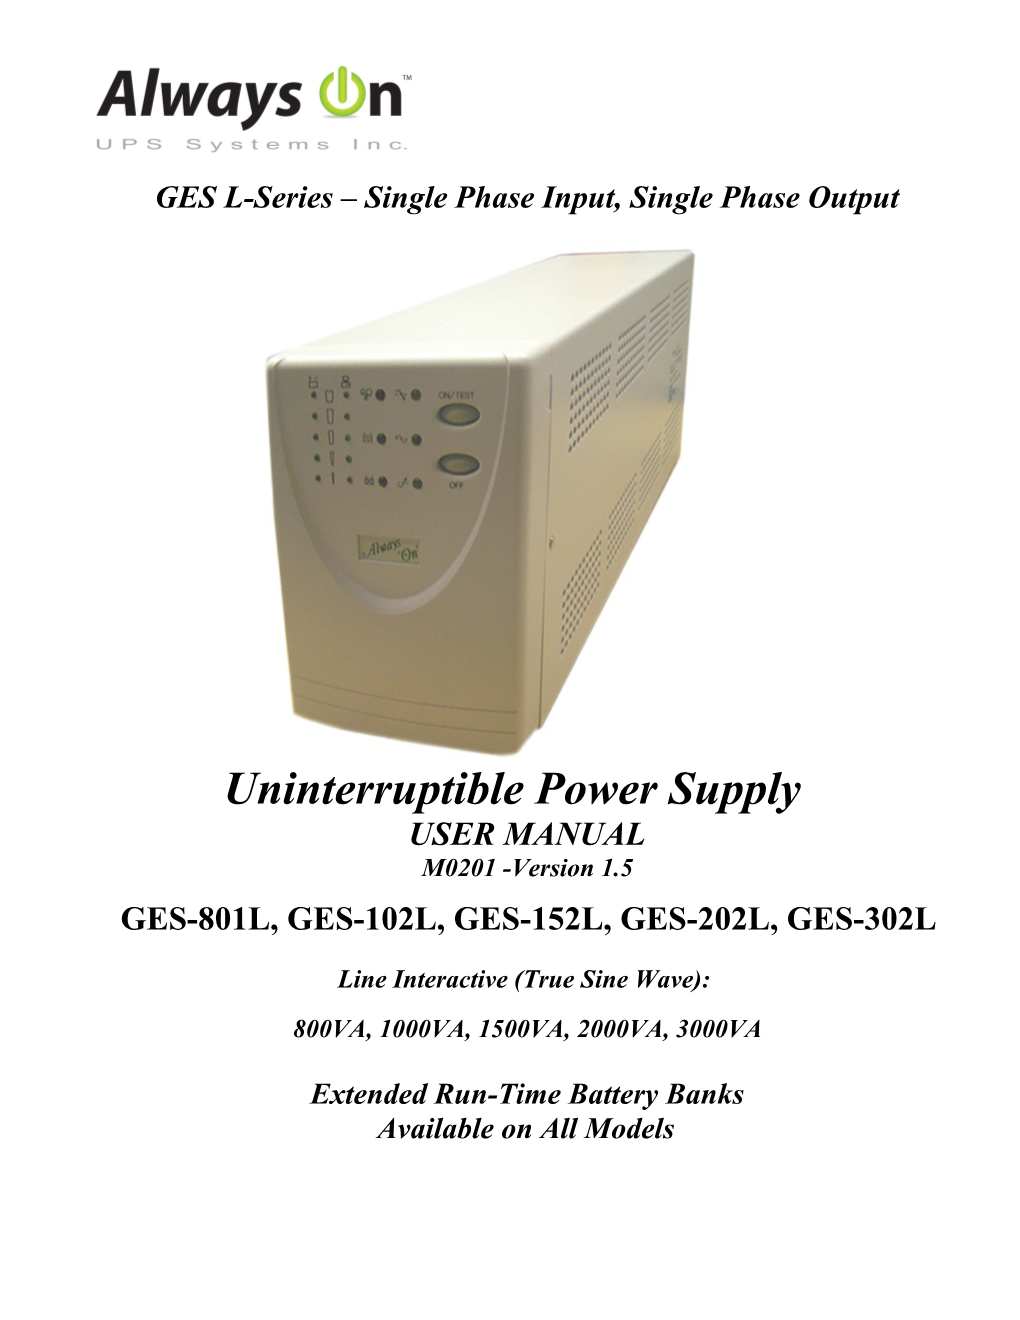 GES L-Series Single Phase Input, Single Phase Output